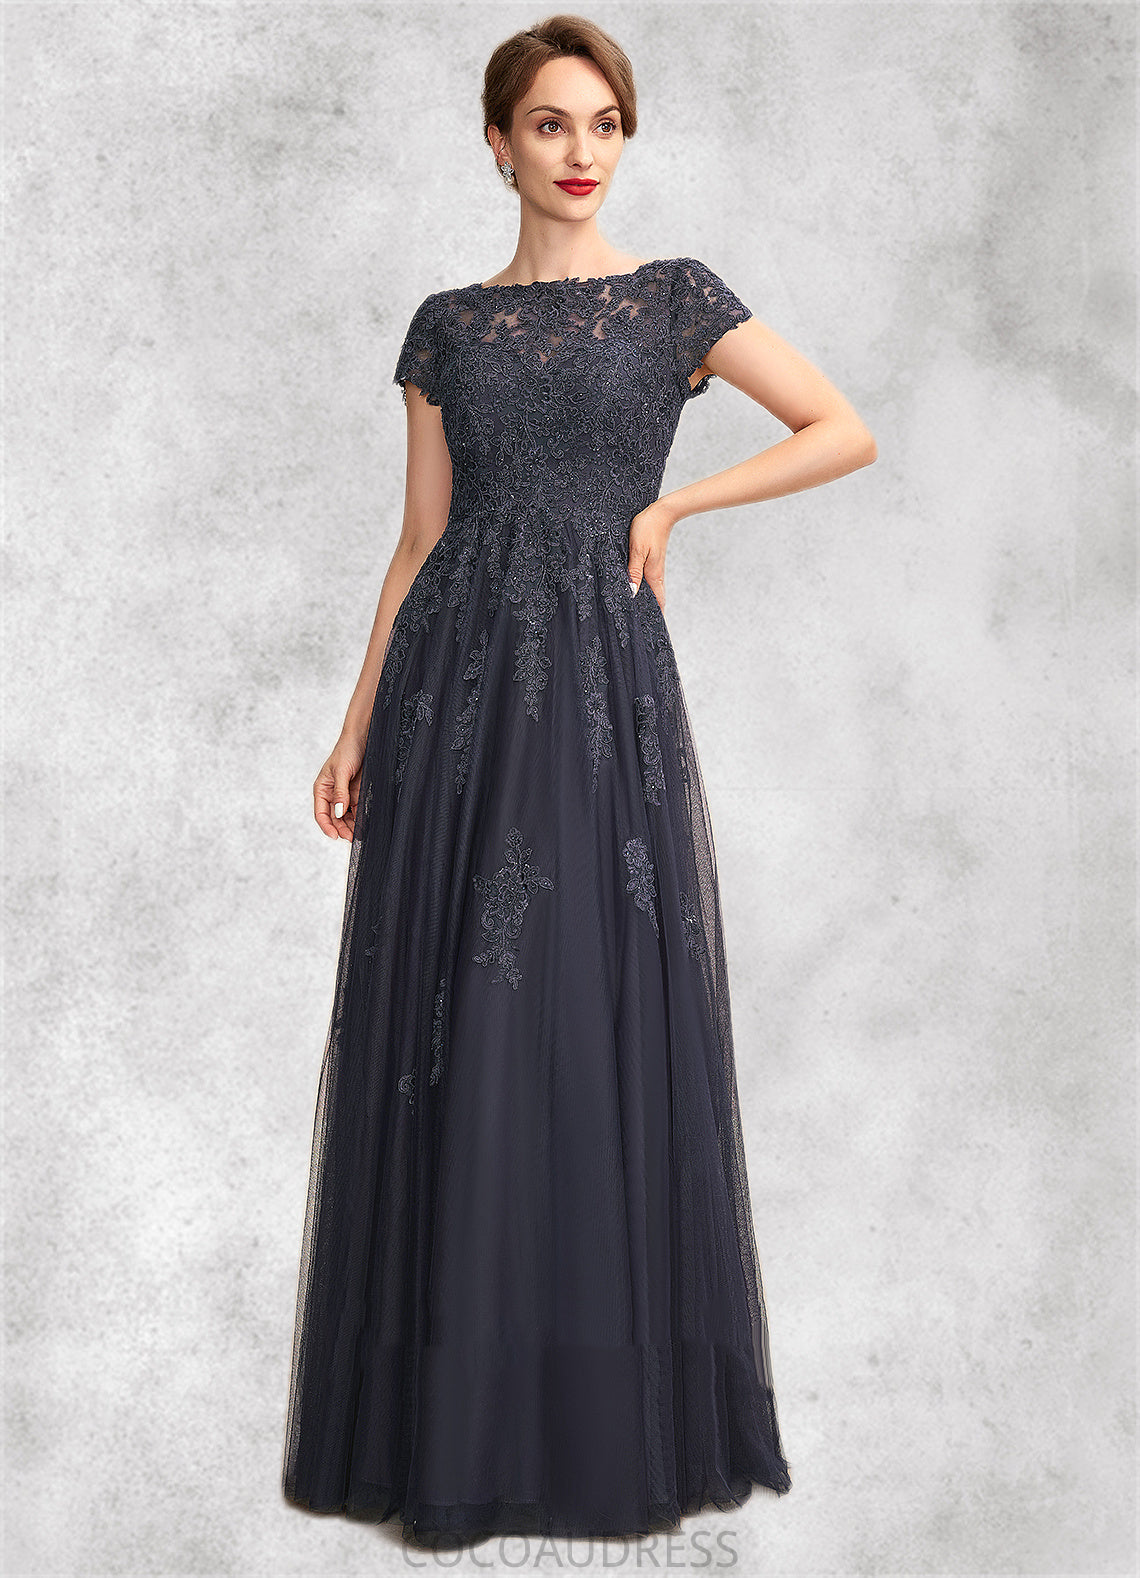 Mabel A-Line Scoop Neck Floor-Length Tulle Lace Mother of the Bride Dress With Beading 126P0015029